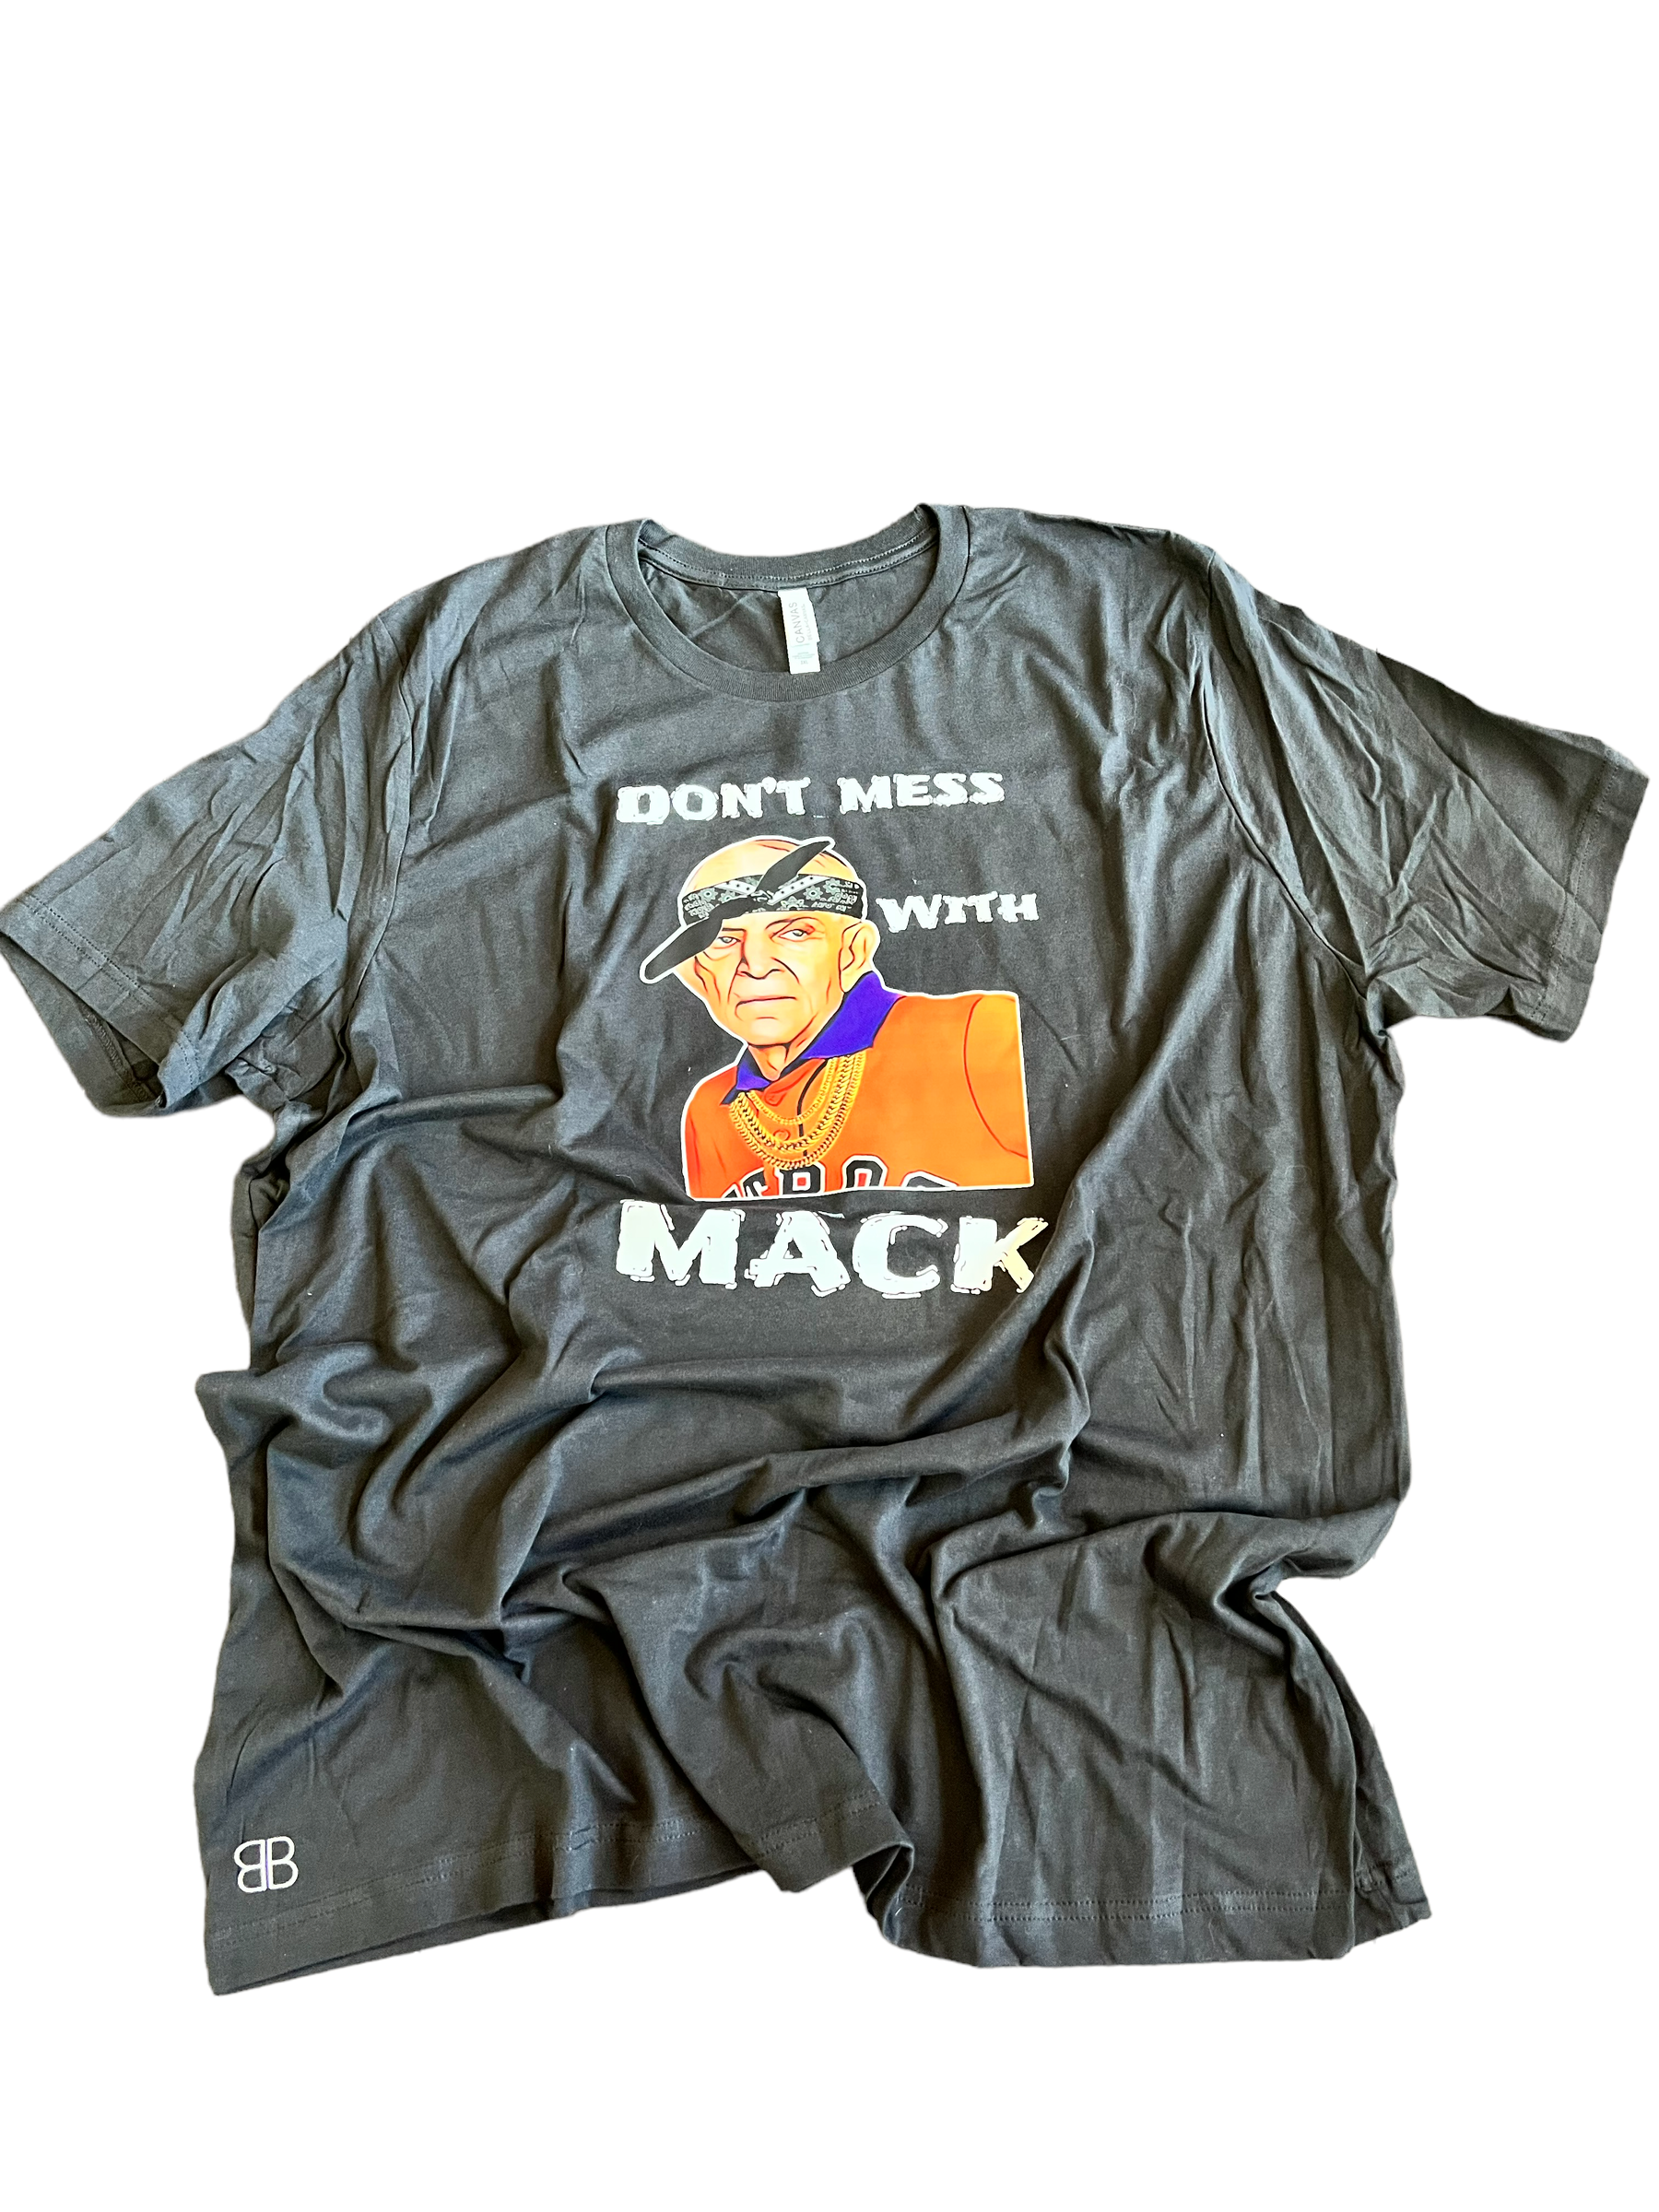 RTS 3XL MACK ADULT T-SHIRT *flawed tiny white spot above Mack - Baby Bums Clothing 